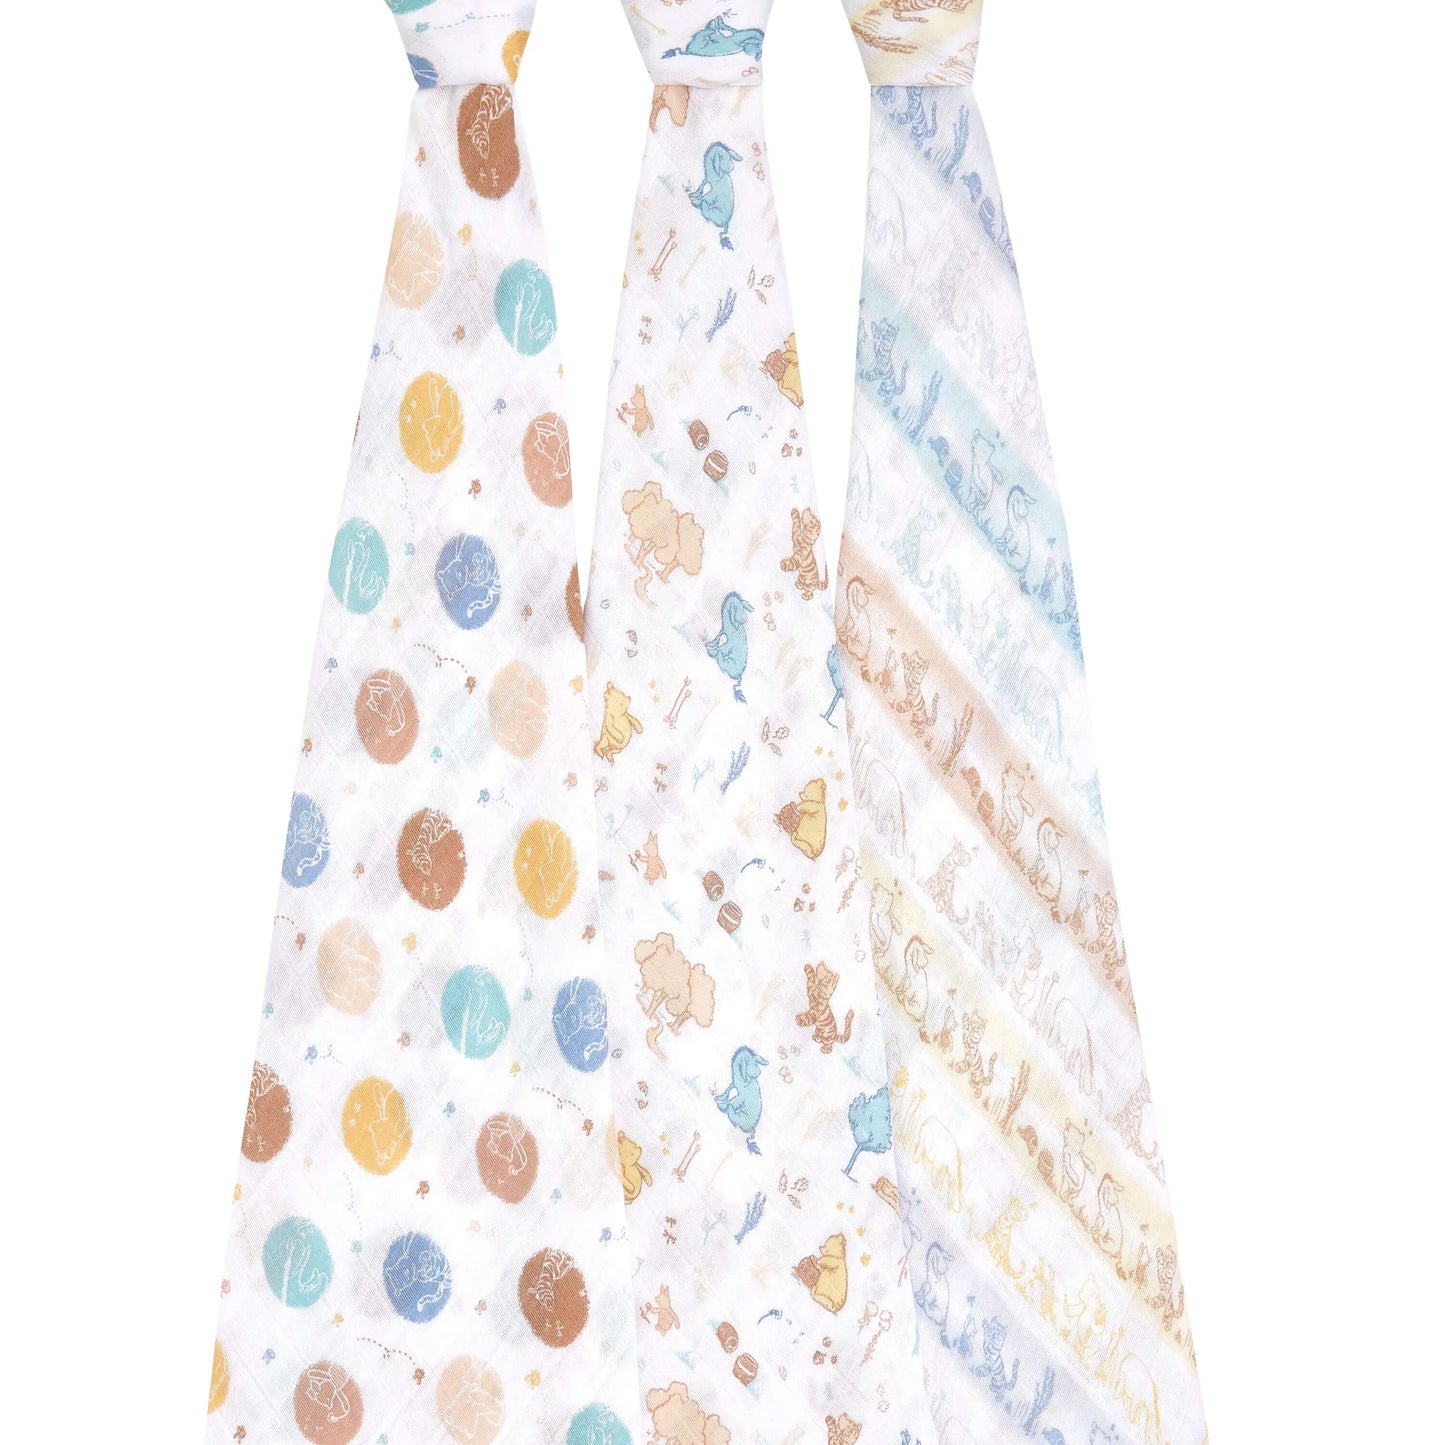 aden + anais Boutique Cotton Swaddle - 3pk (Winnie in the Woods)